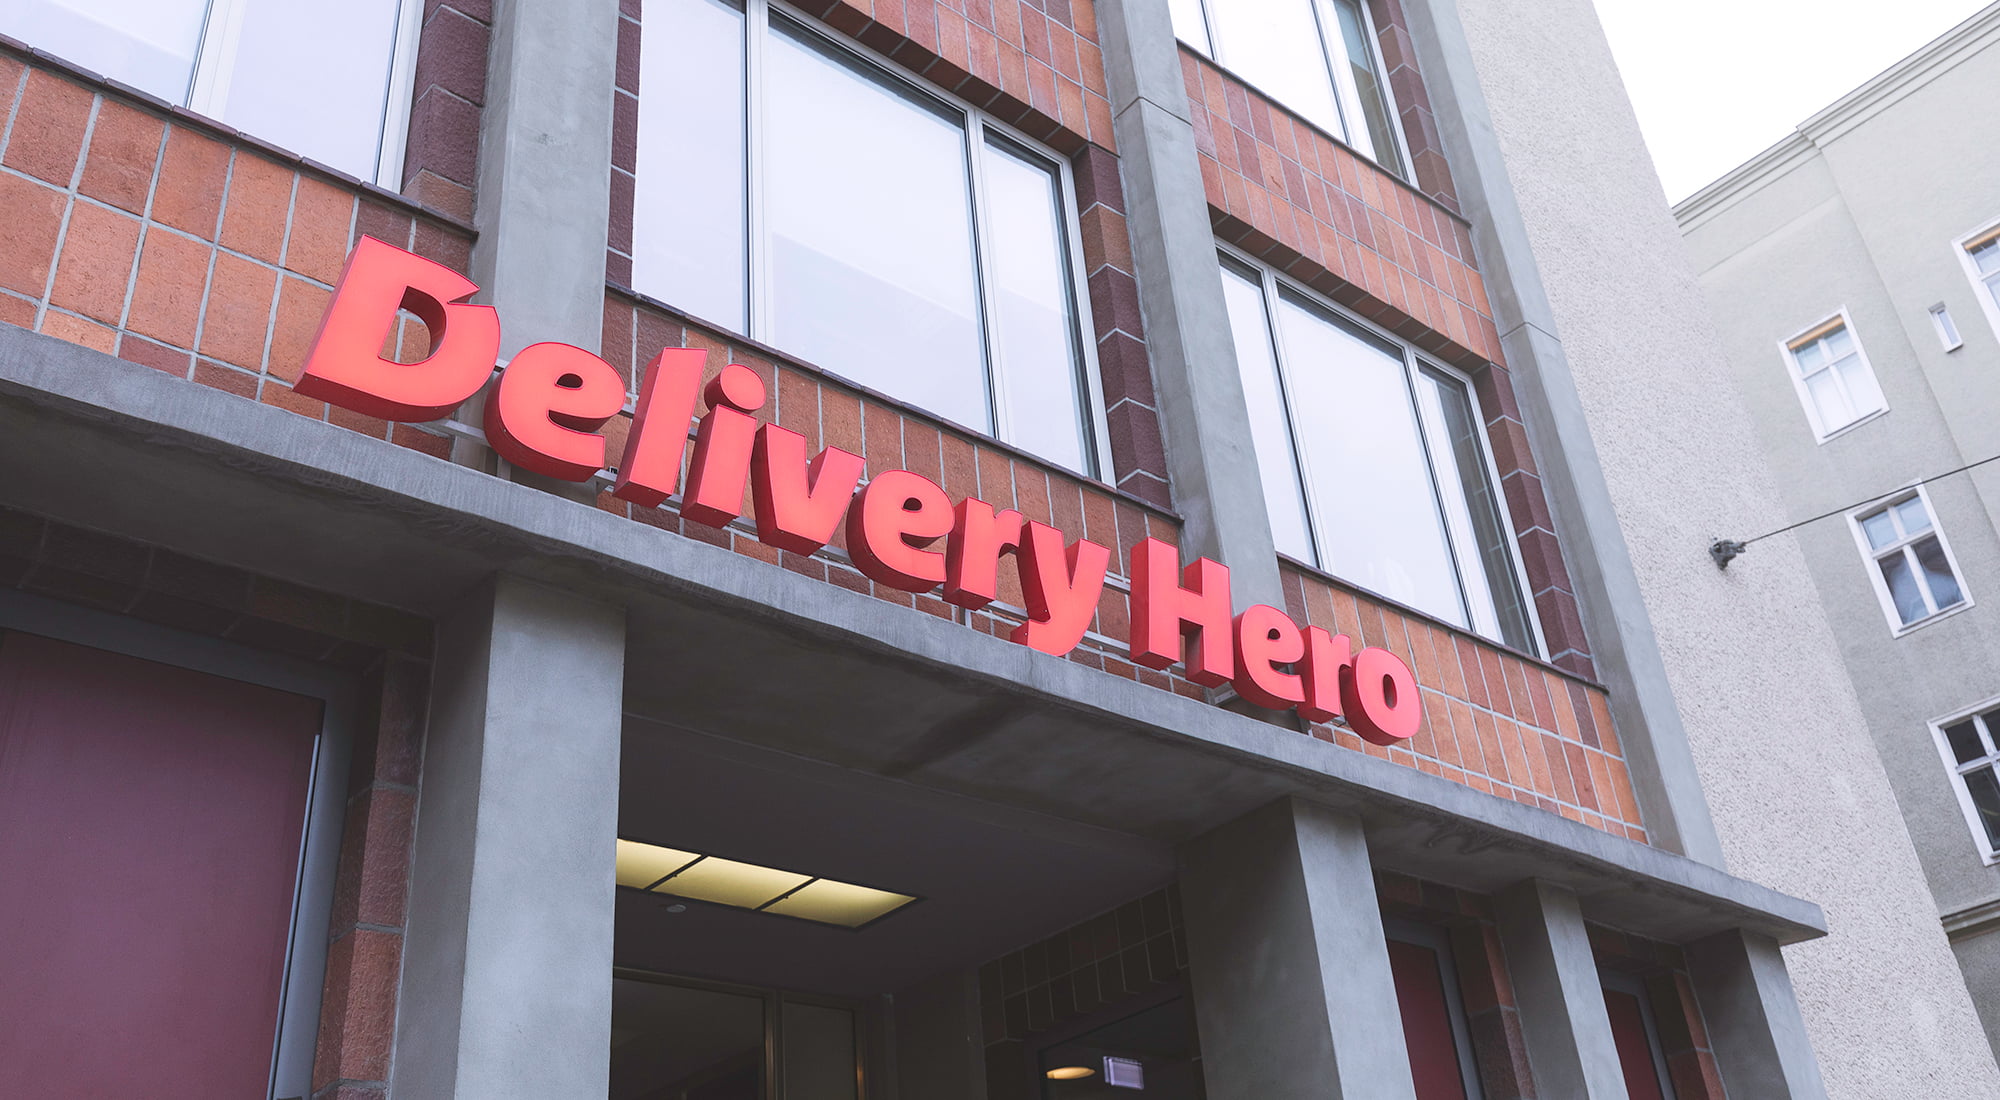 Delivery Hero appoints new Management Board member and reinforces commitment to sustainability